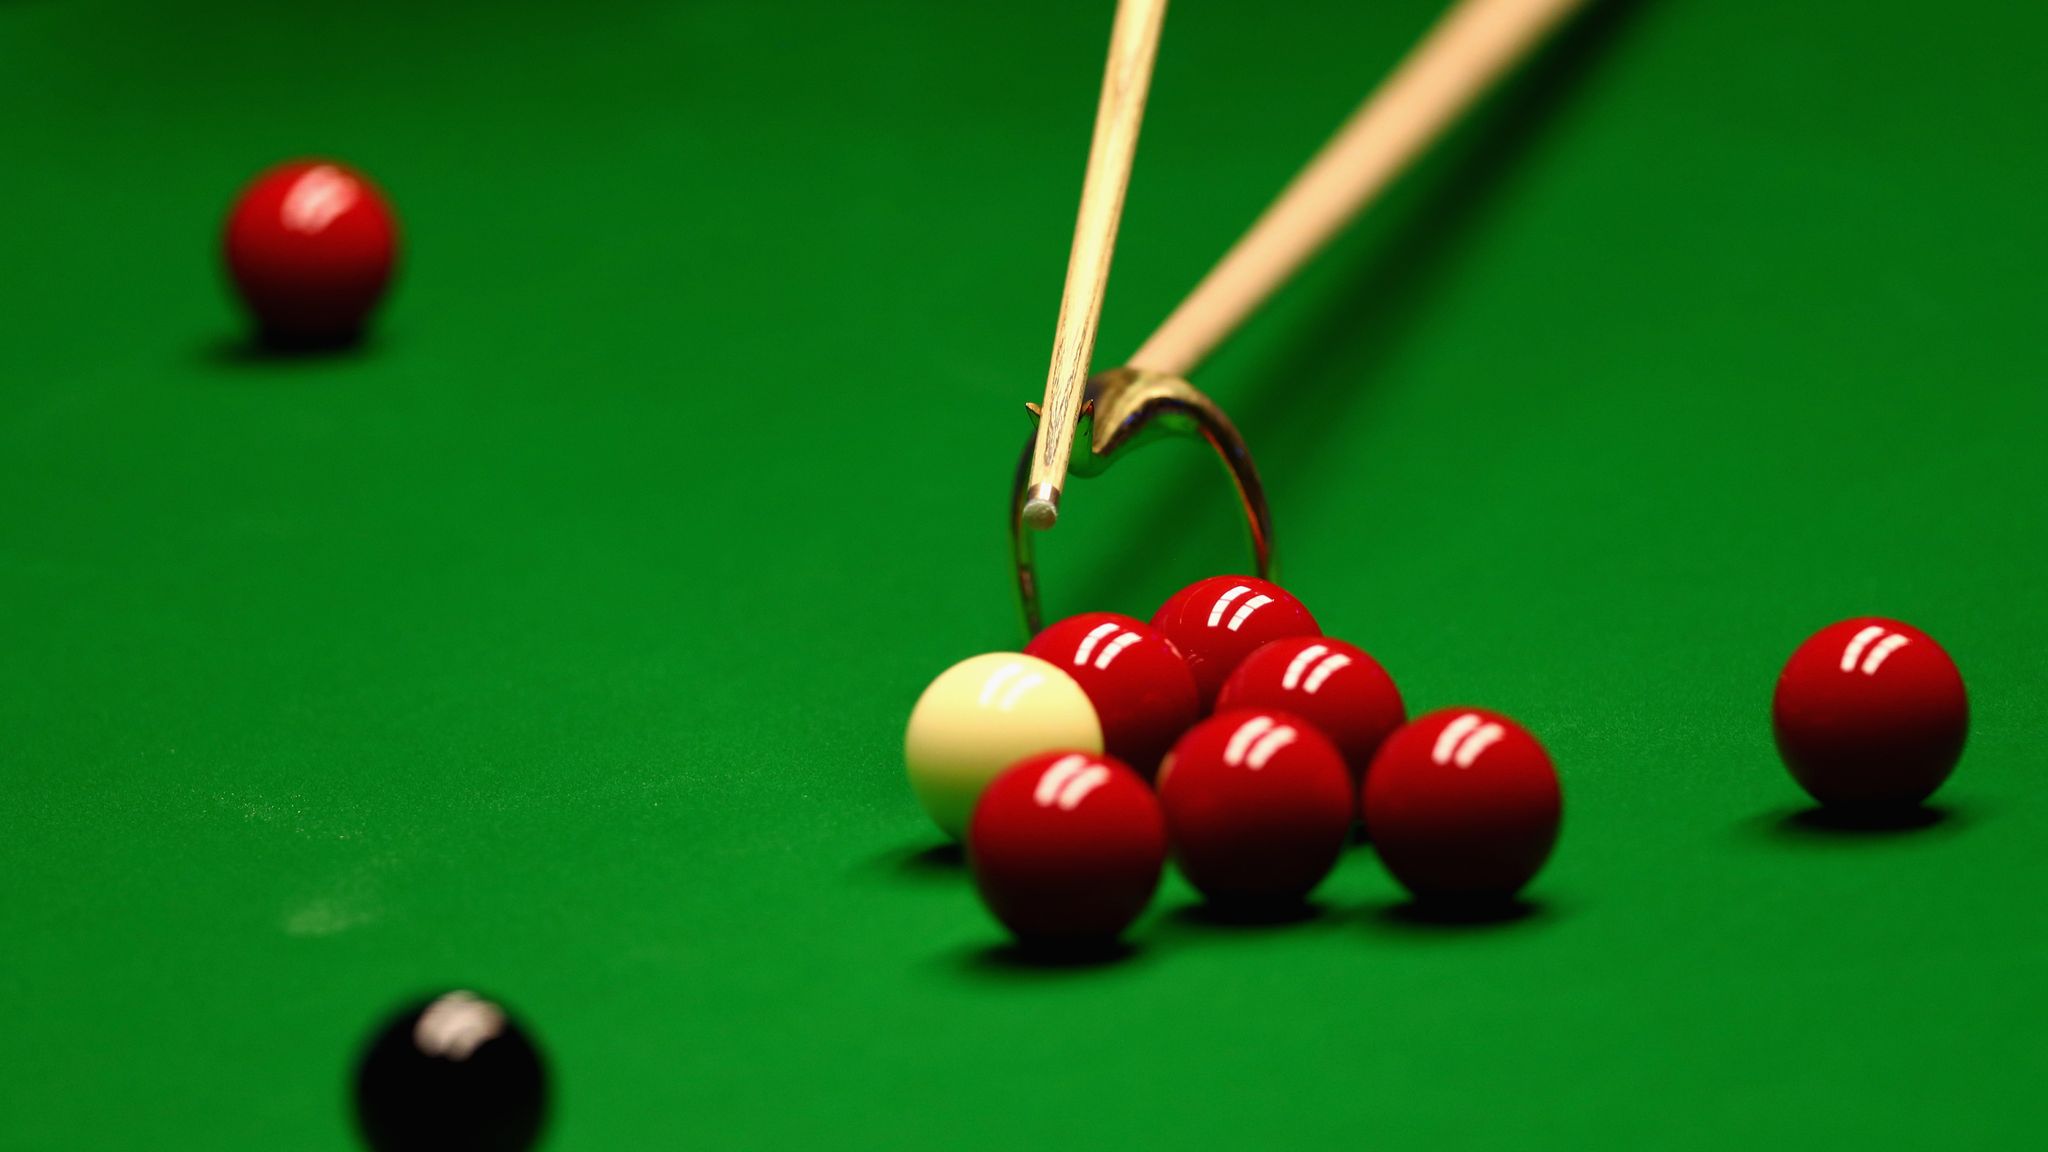 Two Welsh snooker players handed bans following corruption inquiry Snooker News Sky Sports